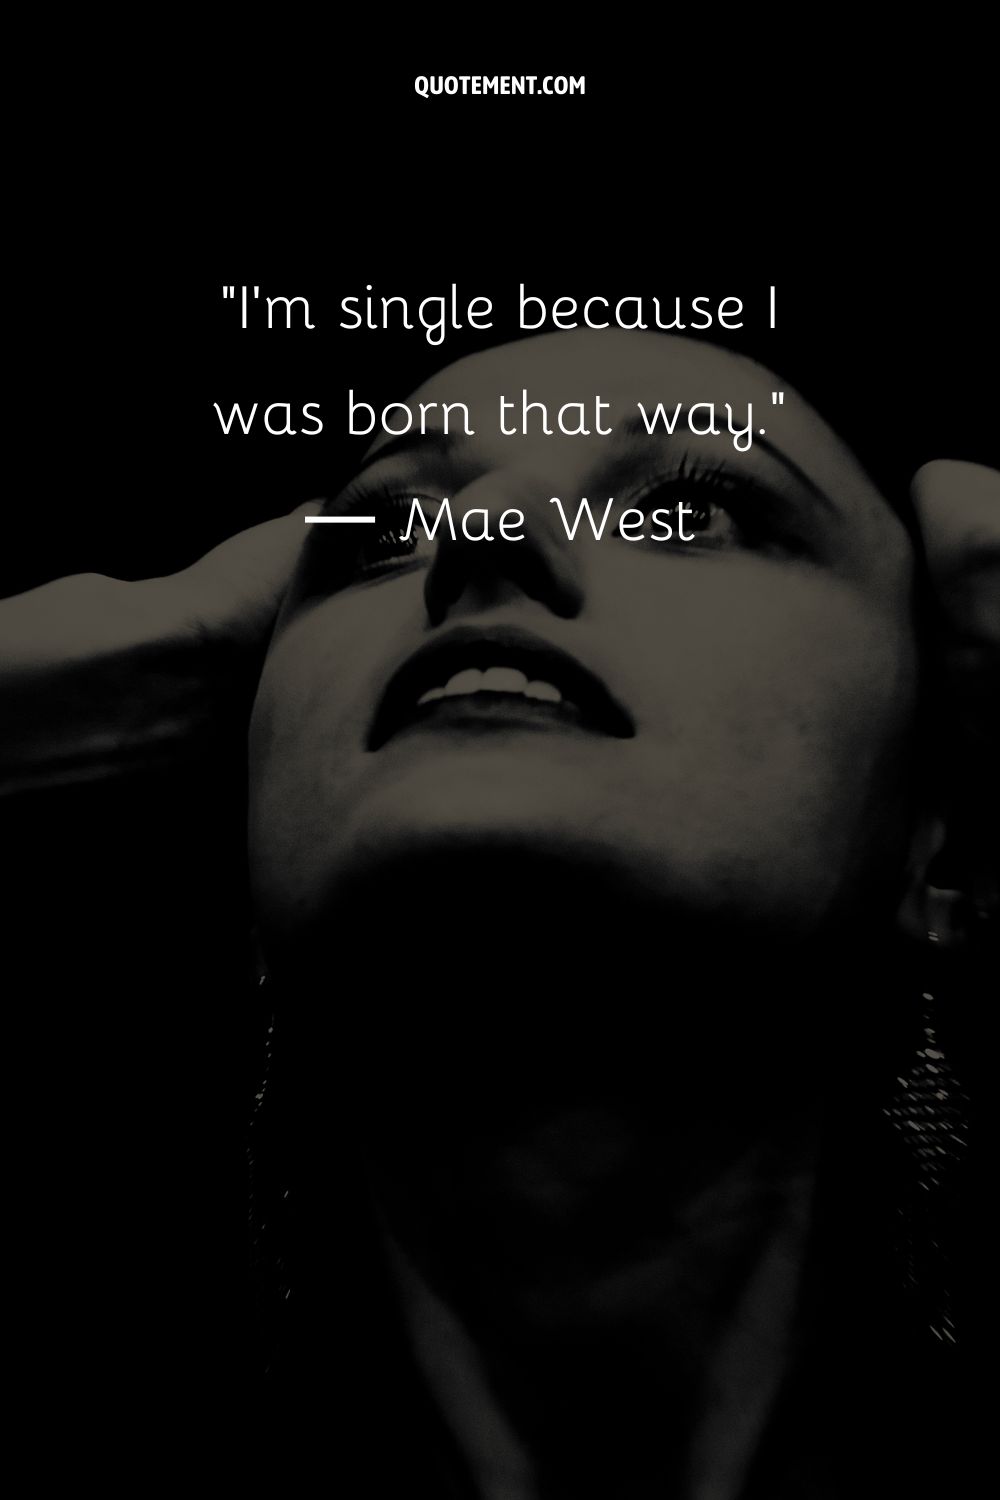 I'm single because I was born that way